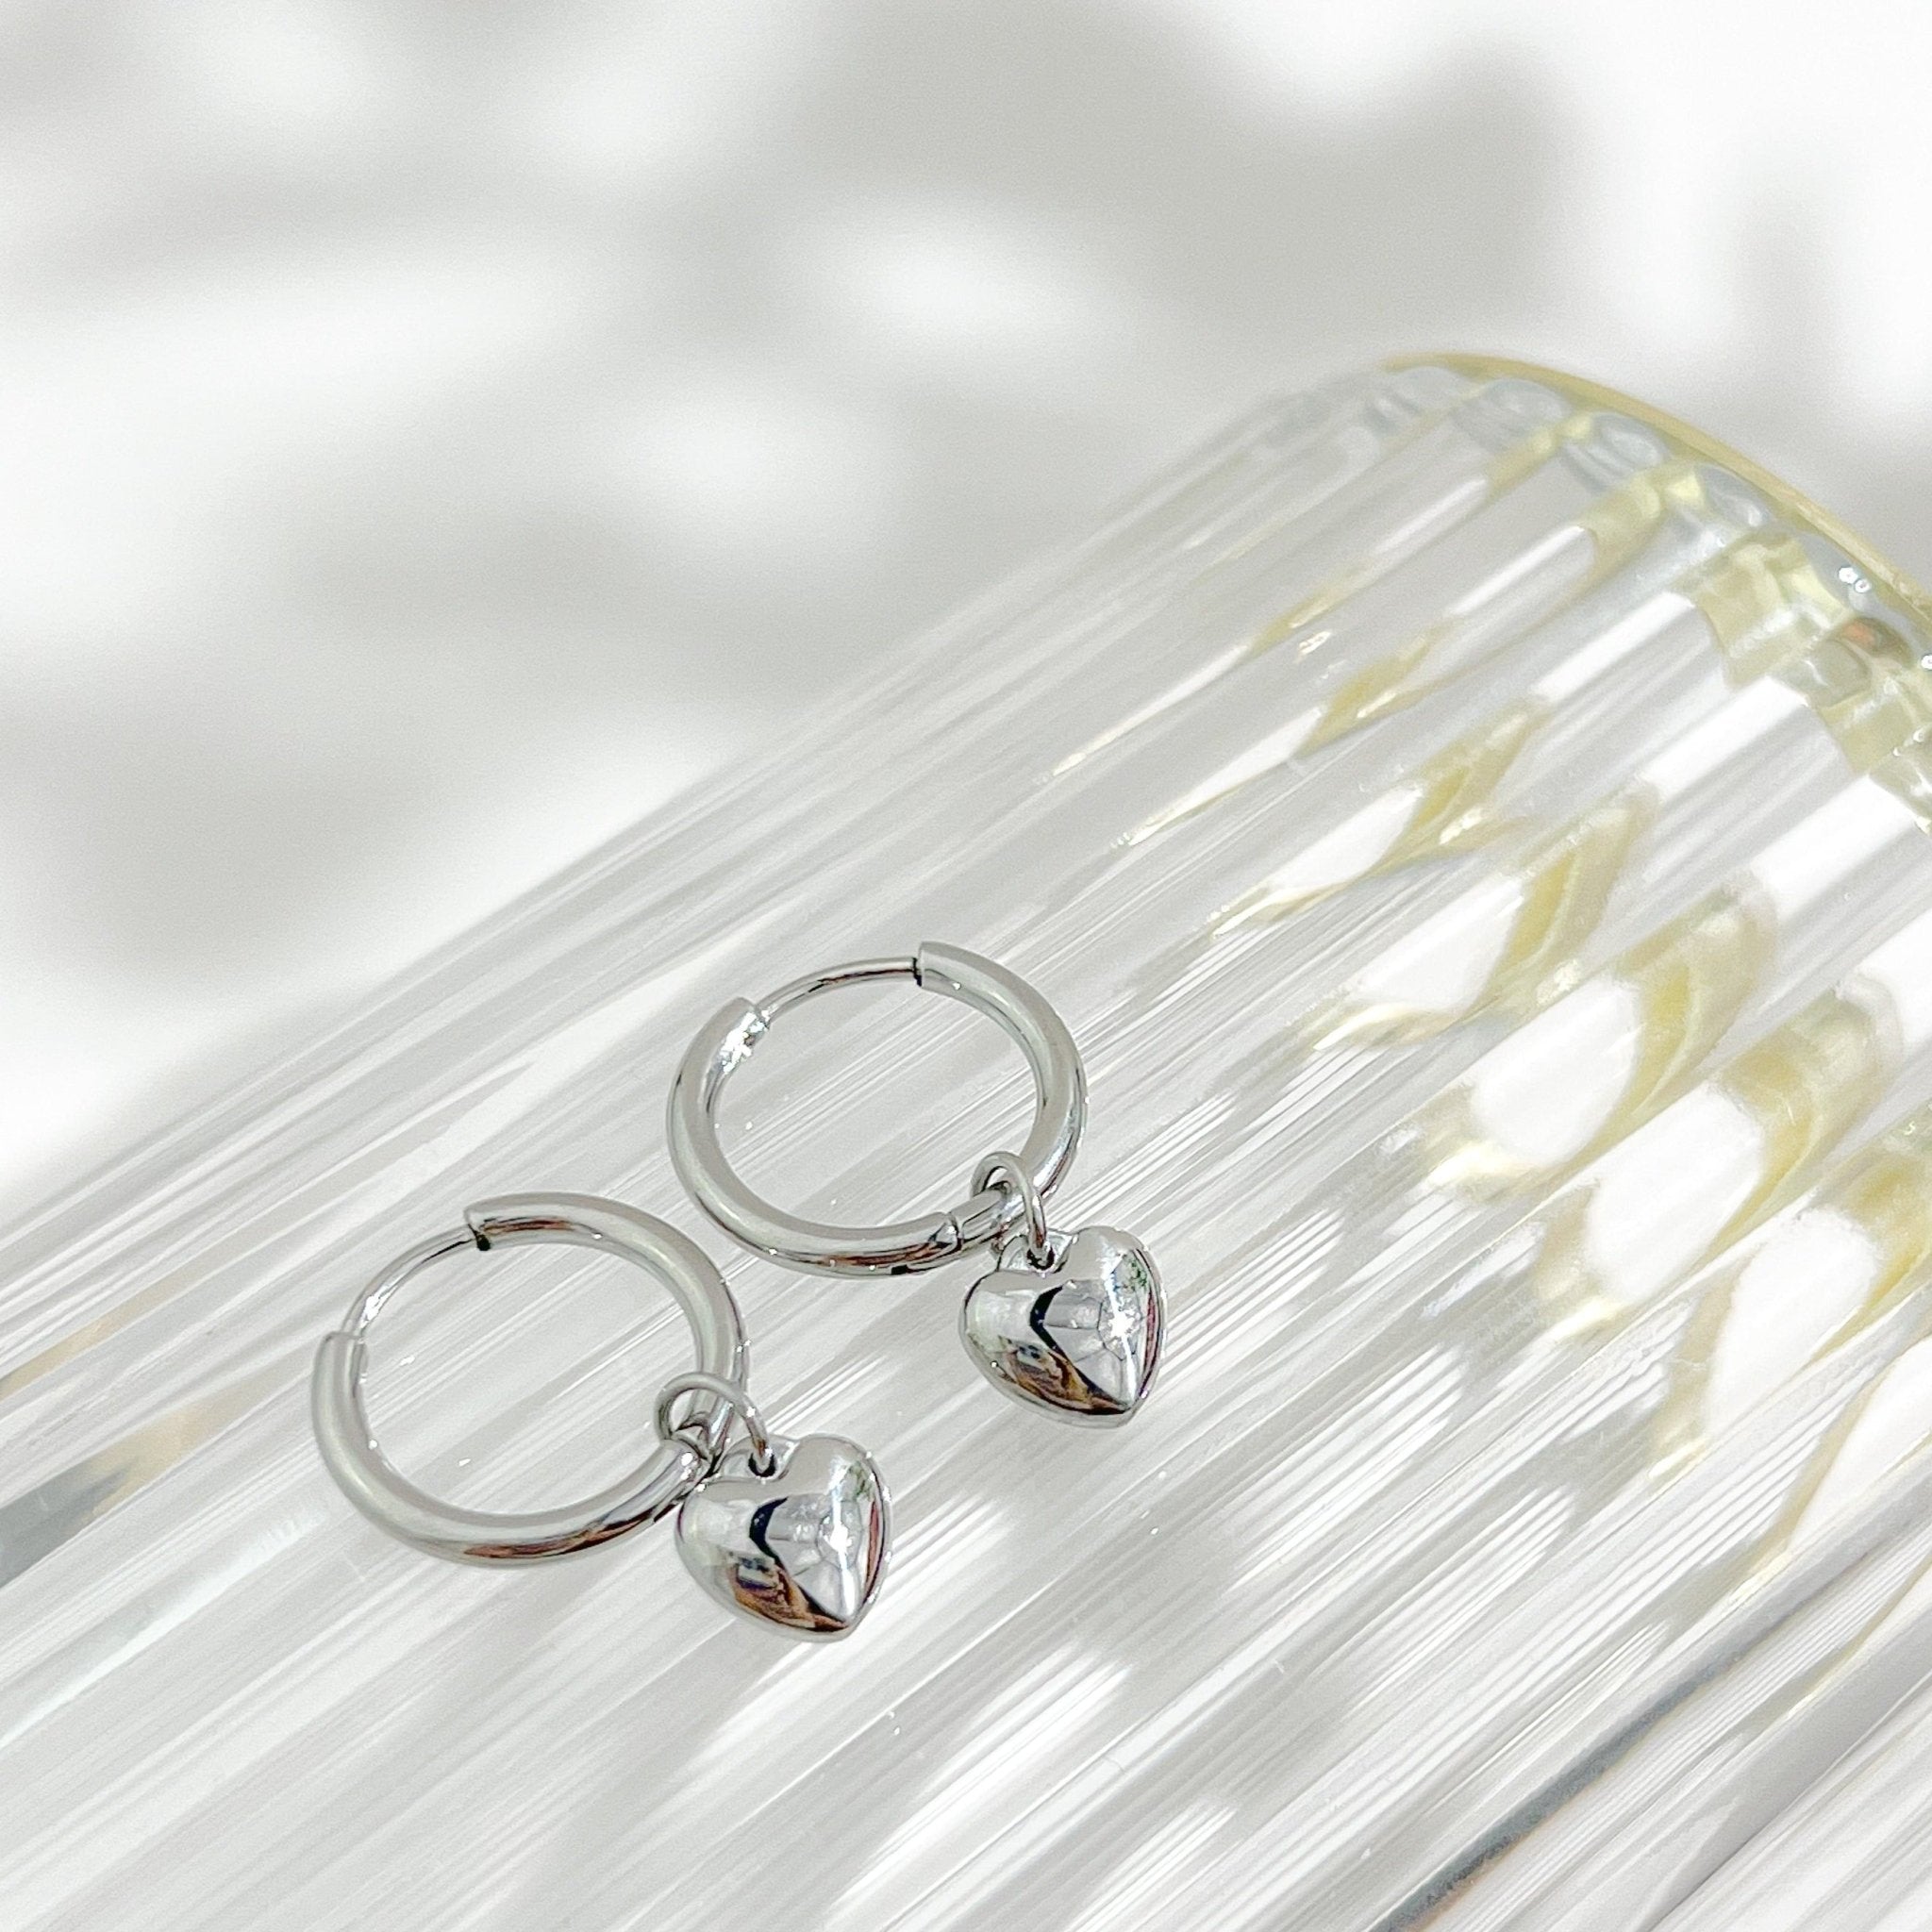 Ophelia Earrings in Silver - Flaire & Co.